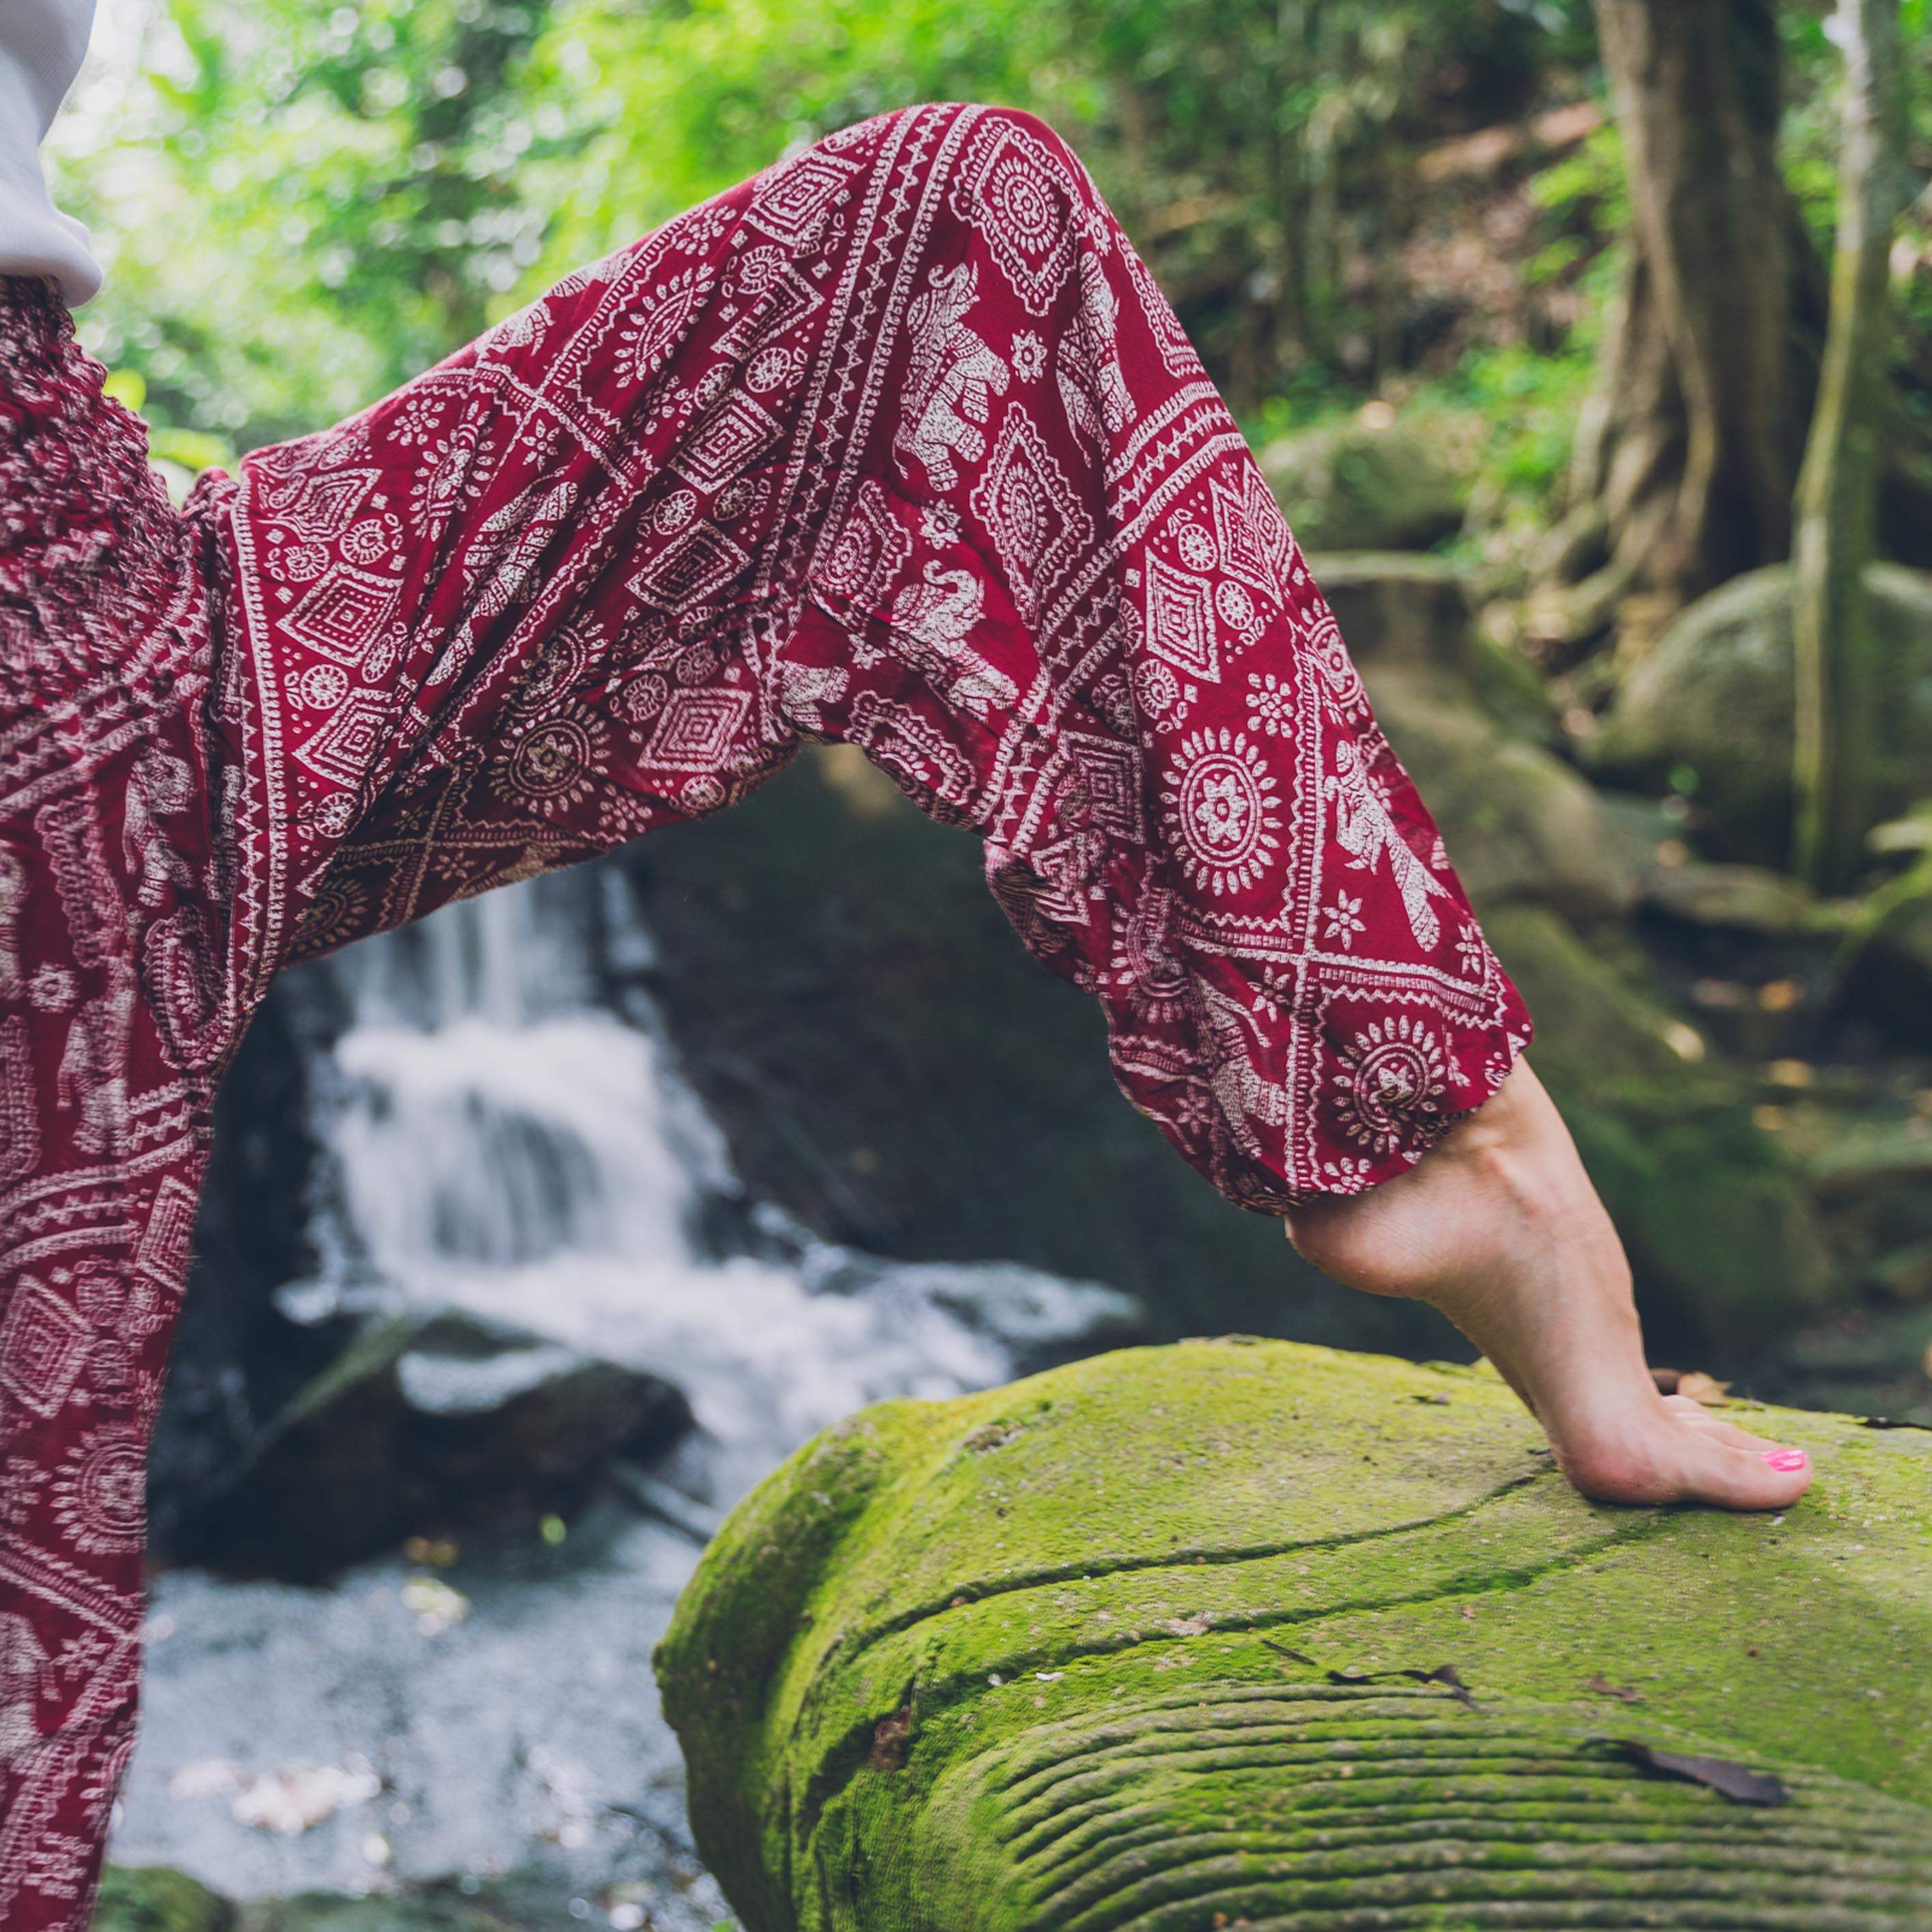 Agra Pants Elepanta Women's Pants - Buy Today Elephant Pants Jewelry And Bohemian Clothes Handmade In Thailand Help To Save The Elephants FairTrade And Vegan